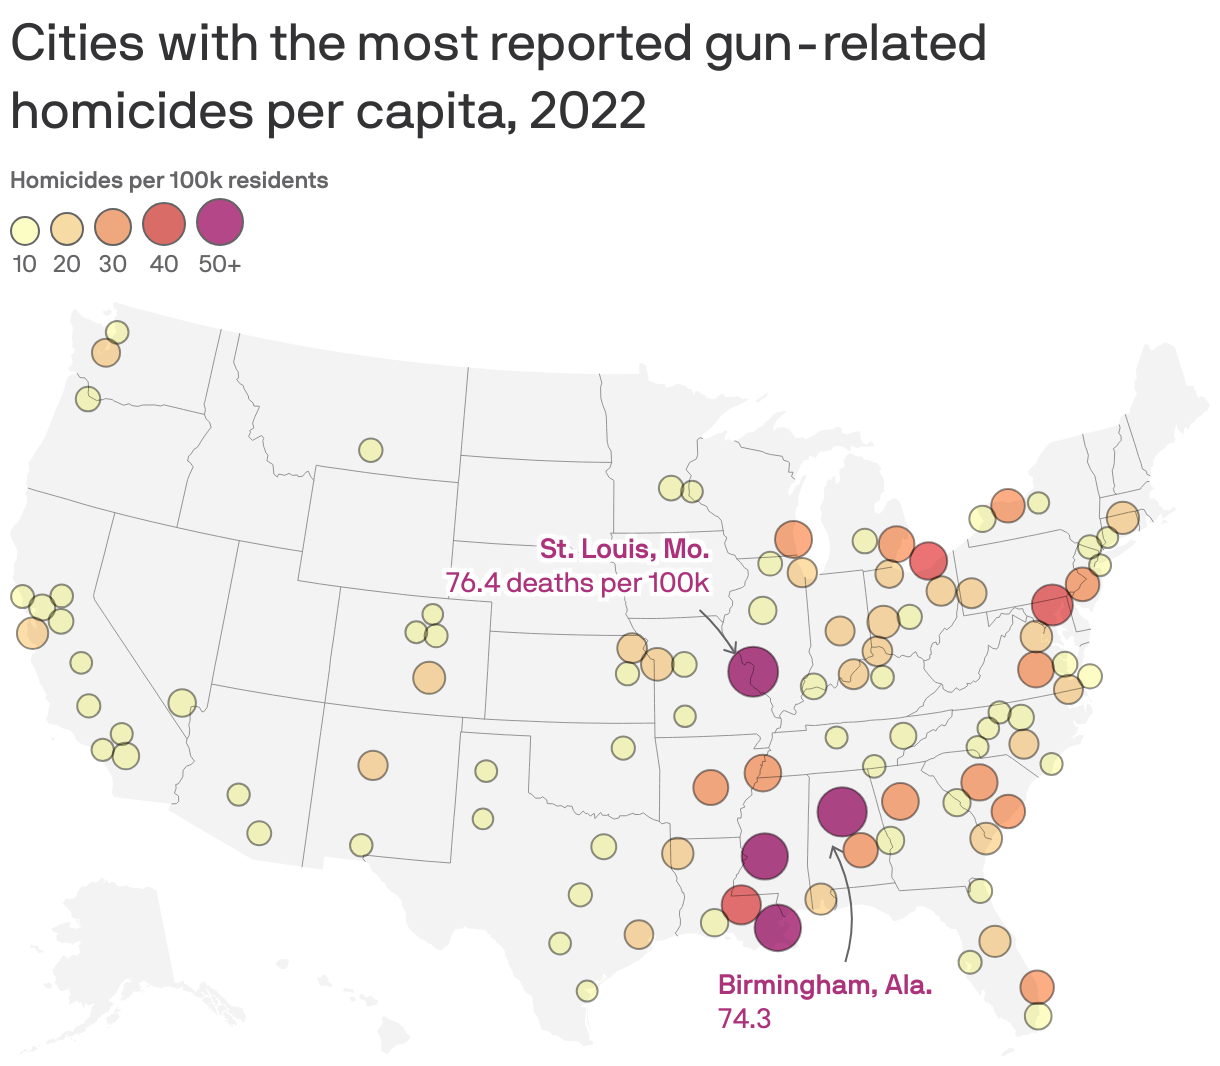 Cities with the most reported gun-related homicides per capita, 2022